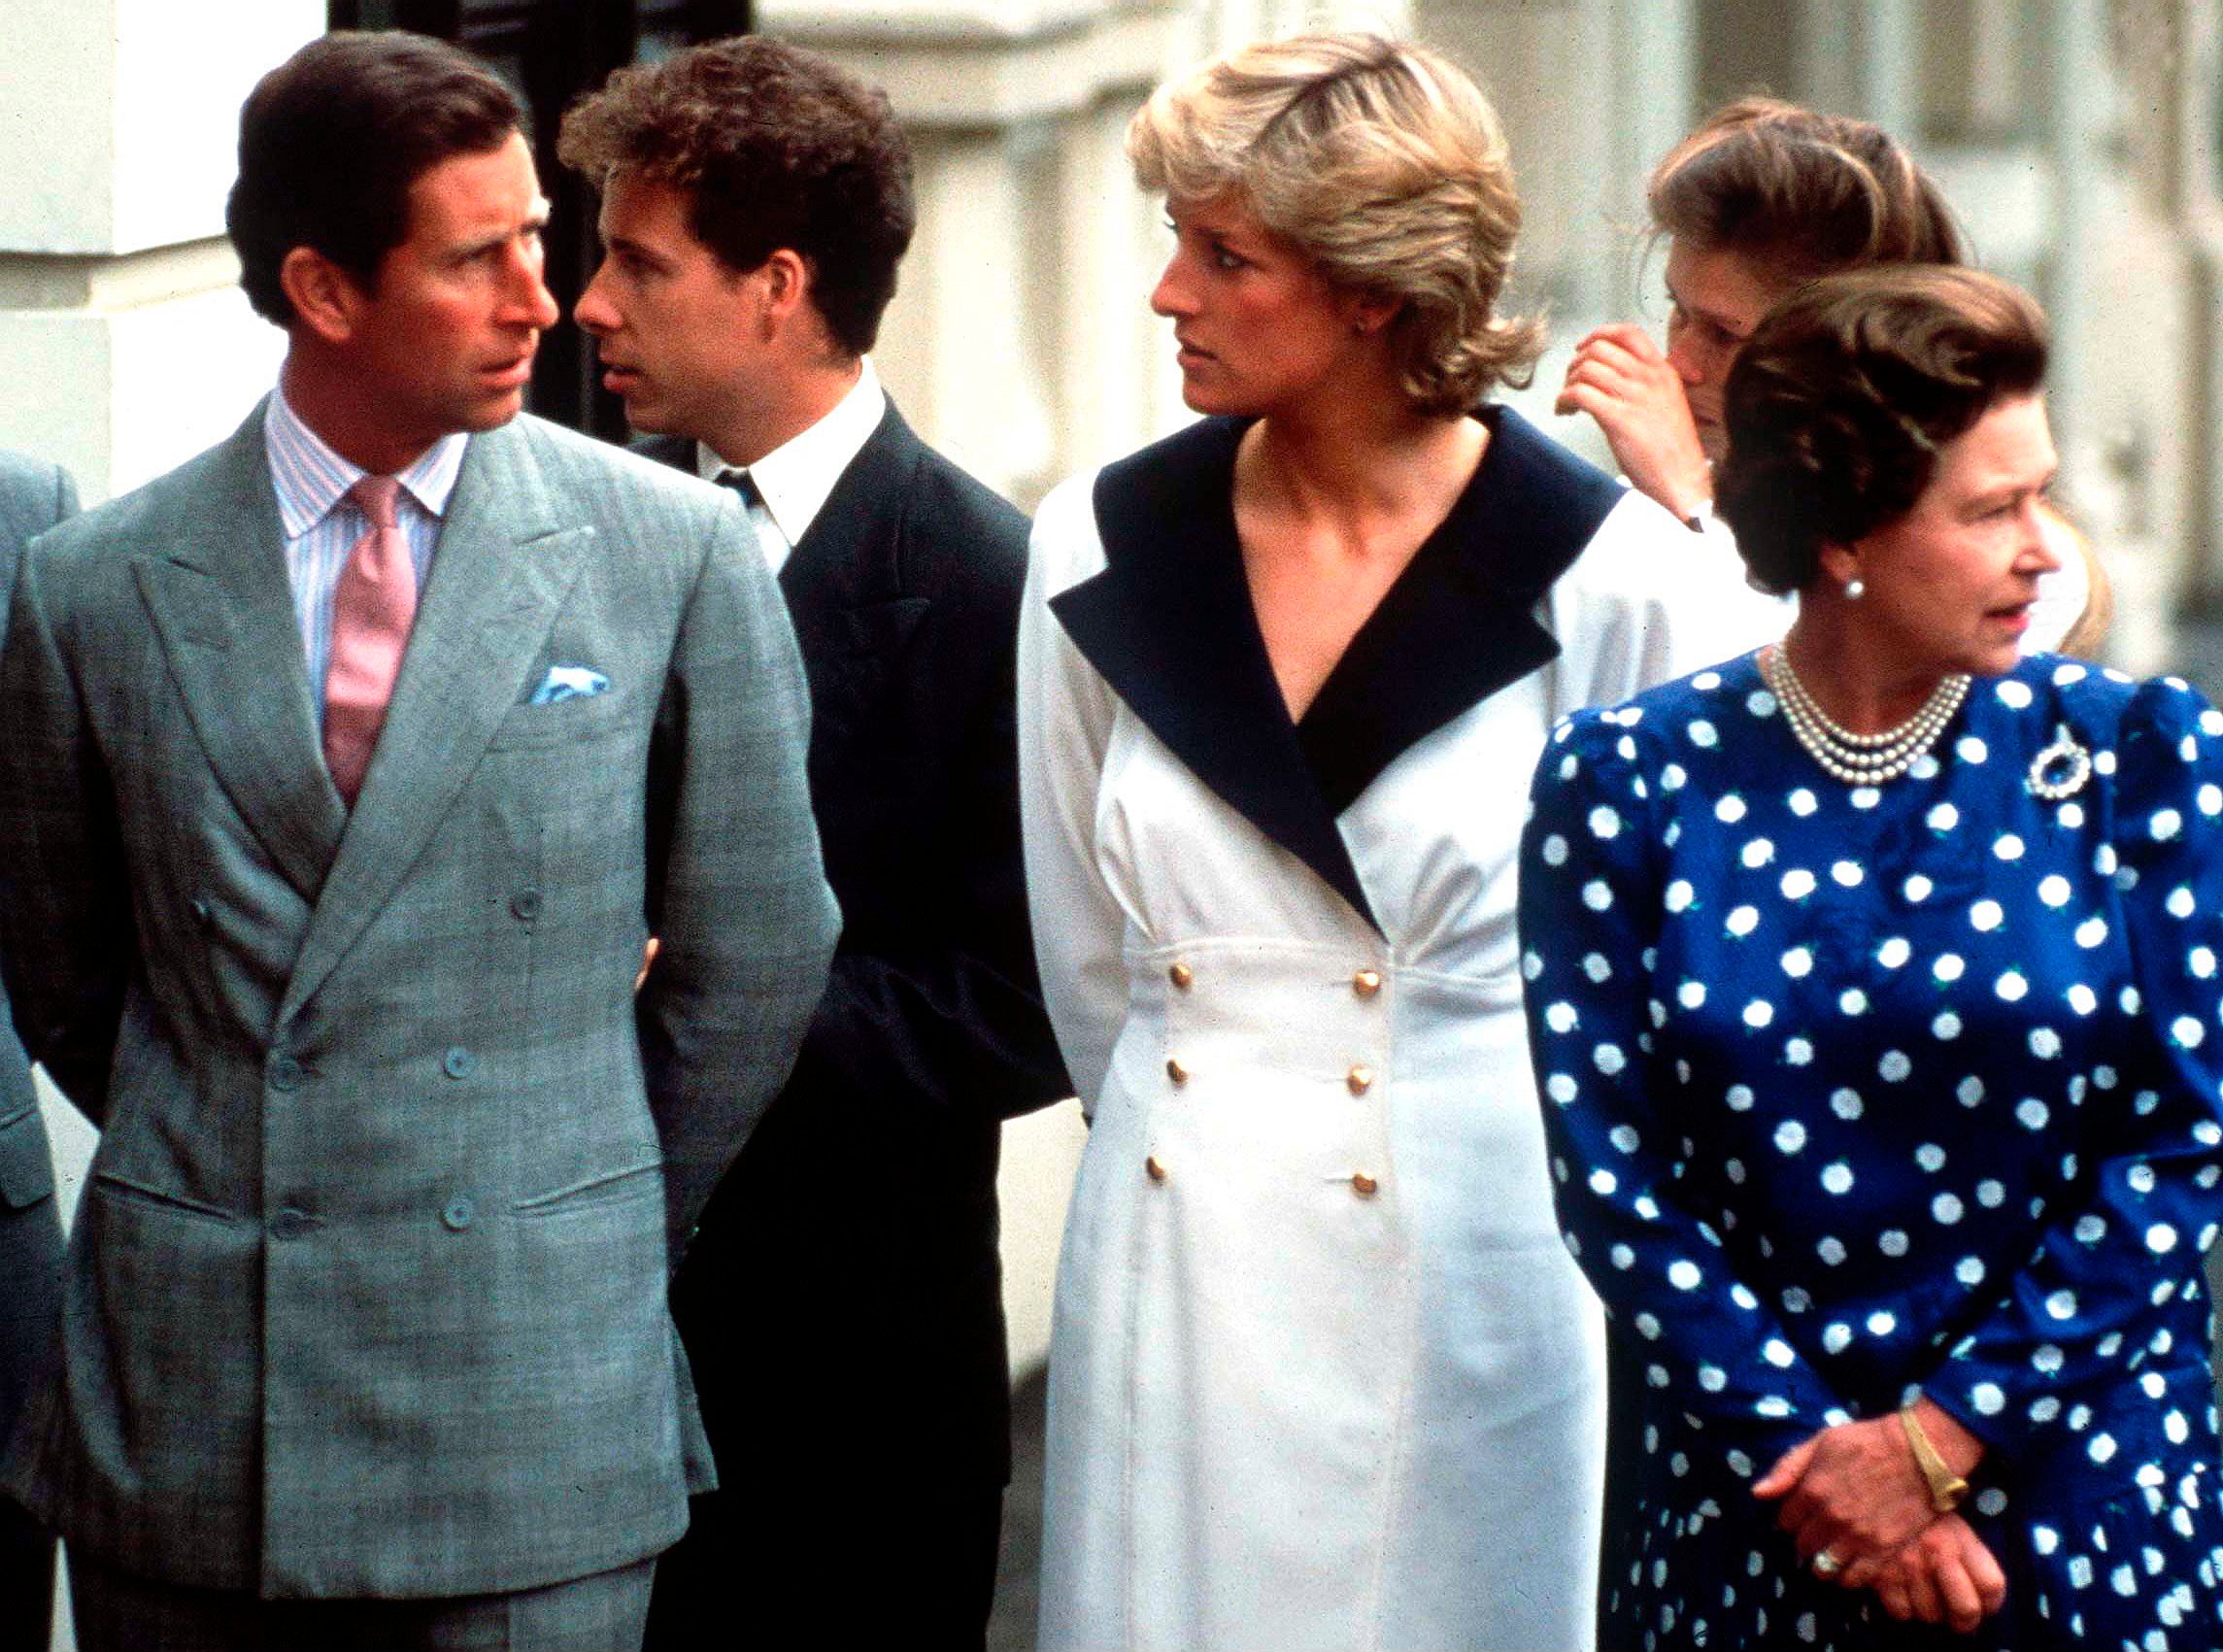 Prince Charles and Princess Diana glaring at each other next to Queen Elizabeth II outside Clarence House